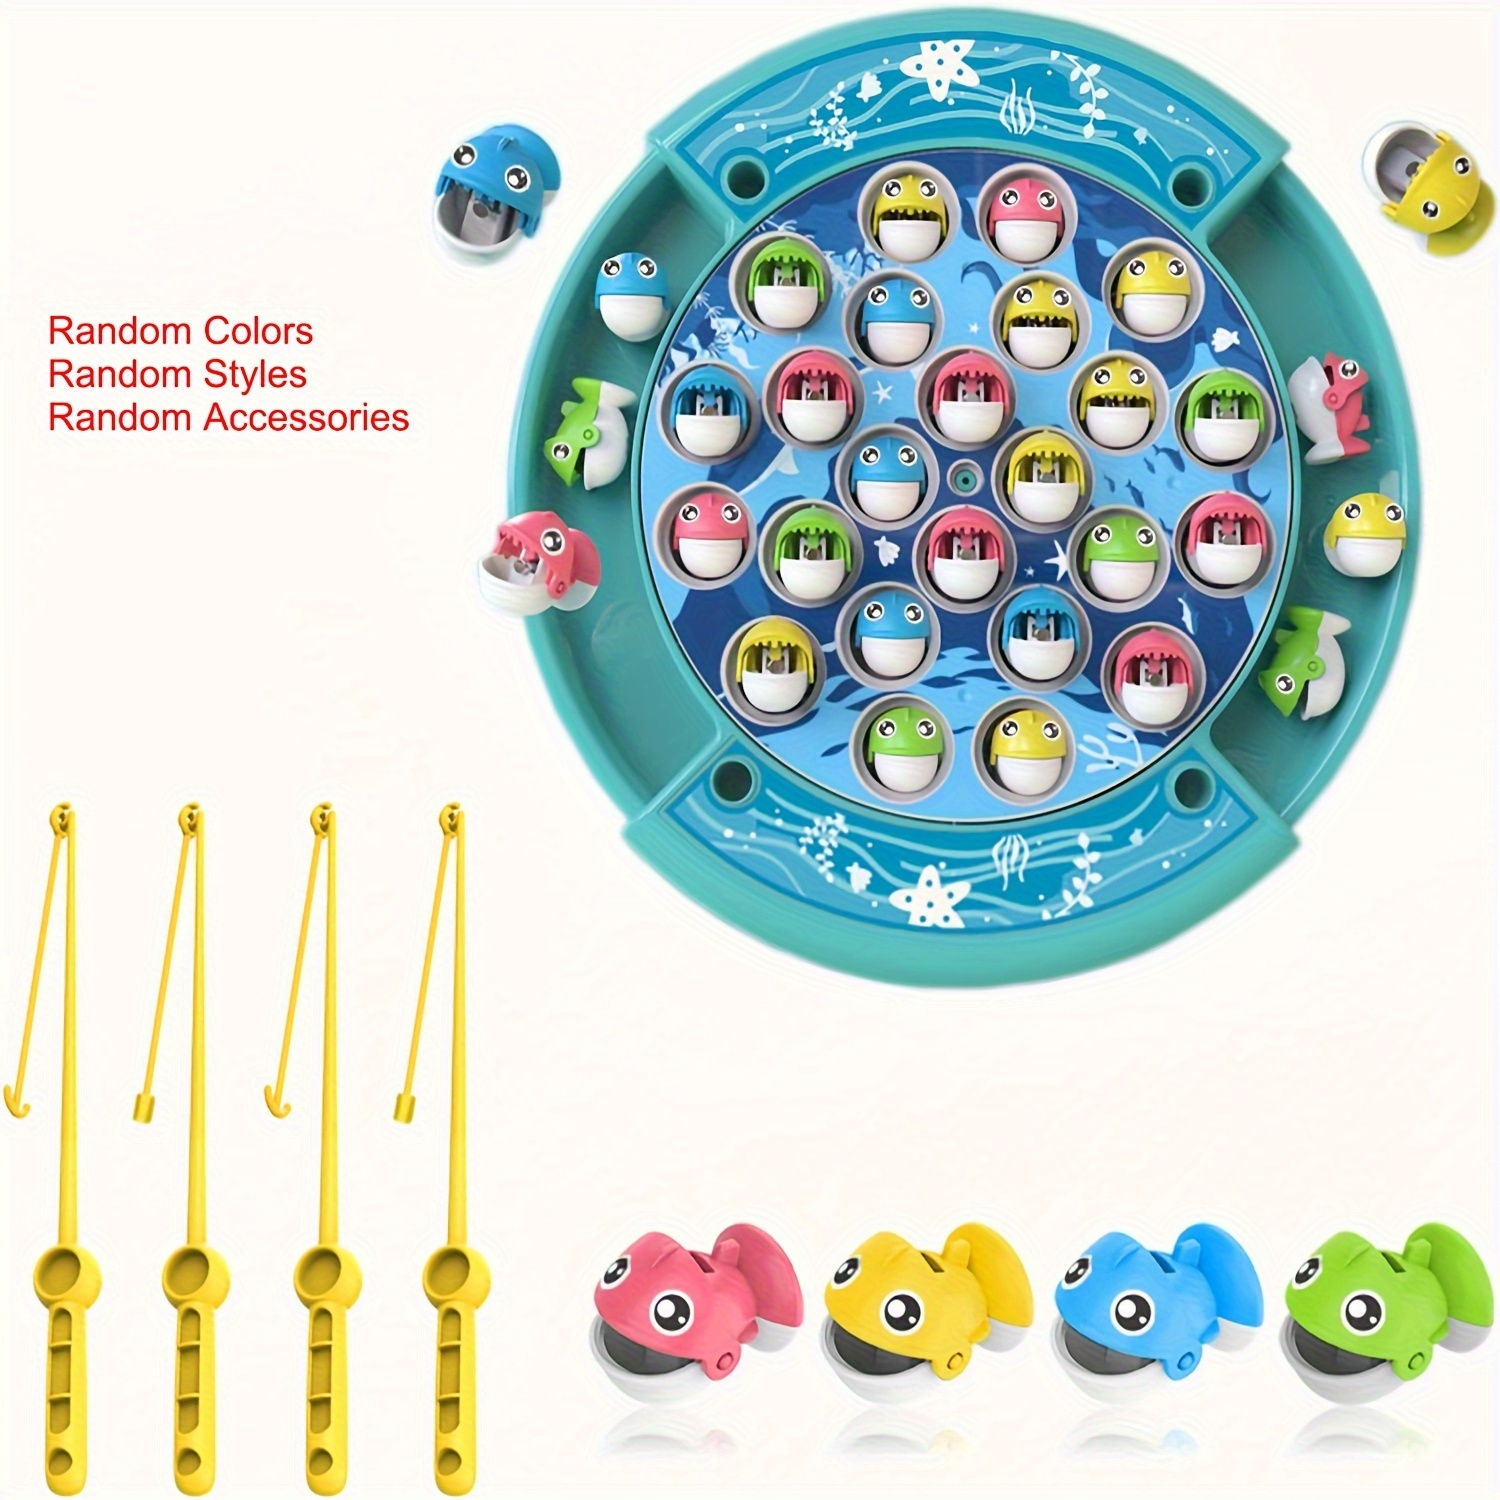 Generic Rotating Fishing Game Kids Toy, Board Game For 3-5 Years